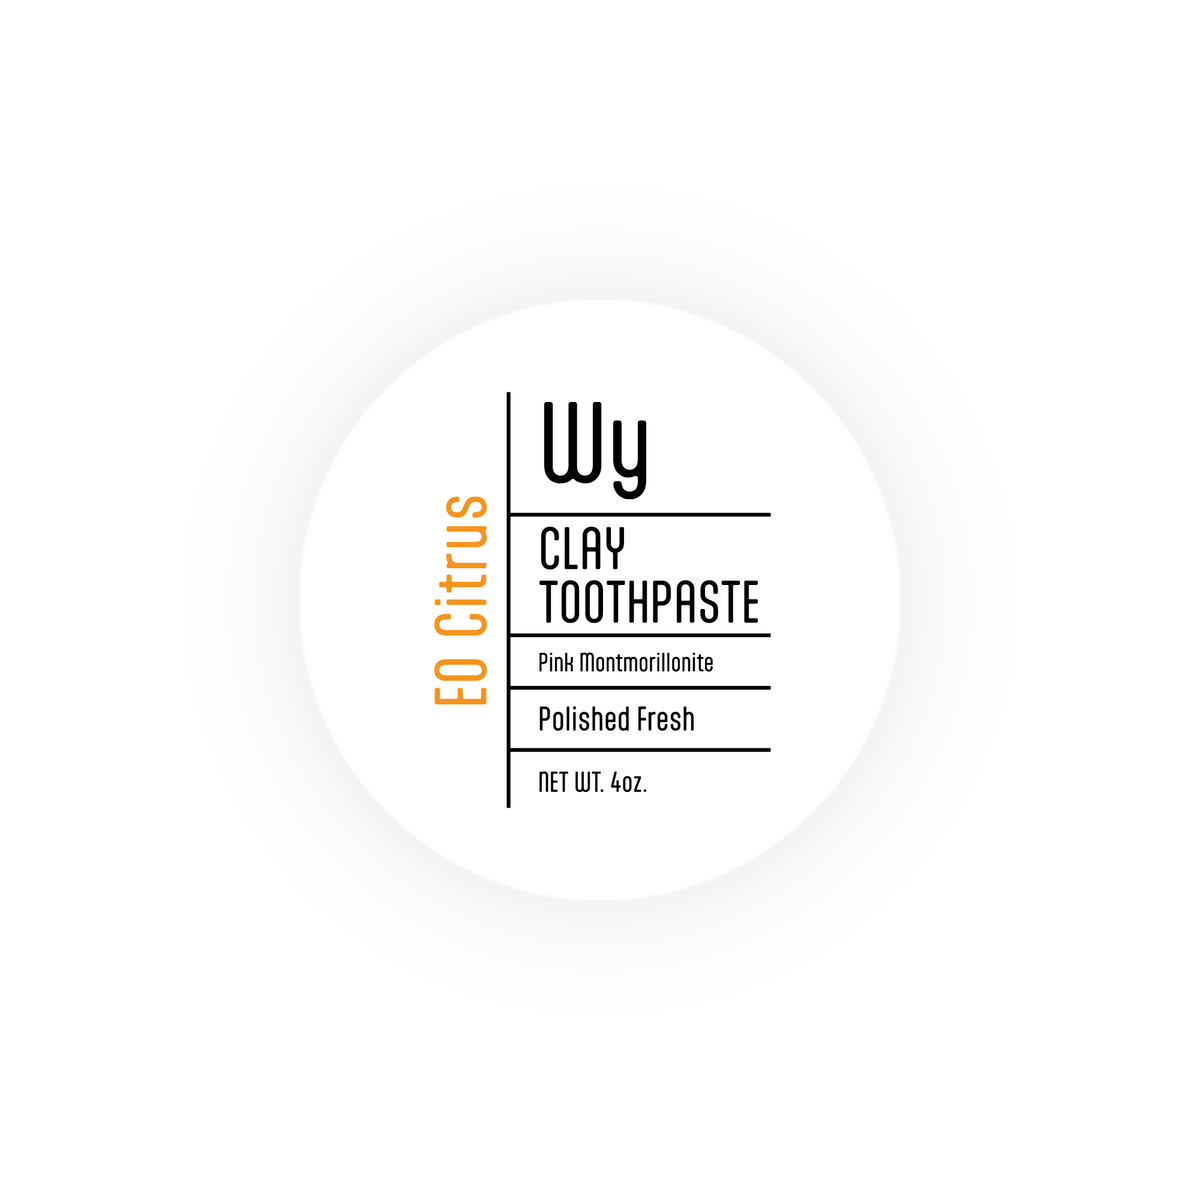 Wy Clay Toothpaste